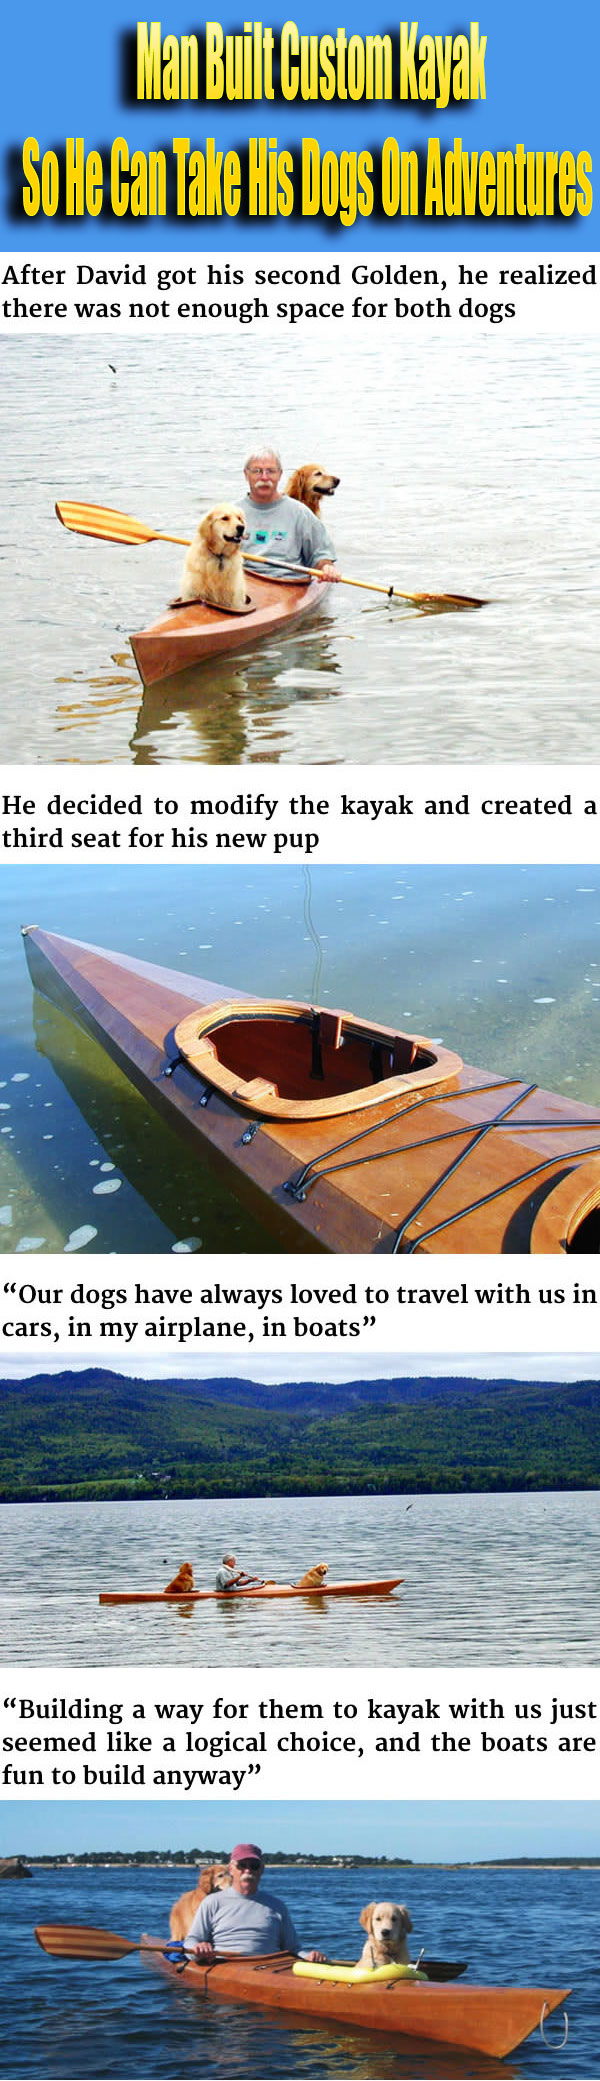 Man Built Custom Kayak So He Can Take His Dogs On Adventures